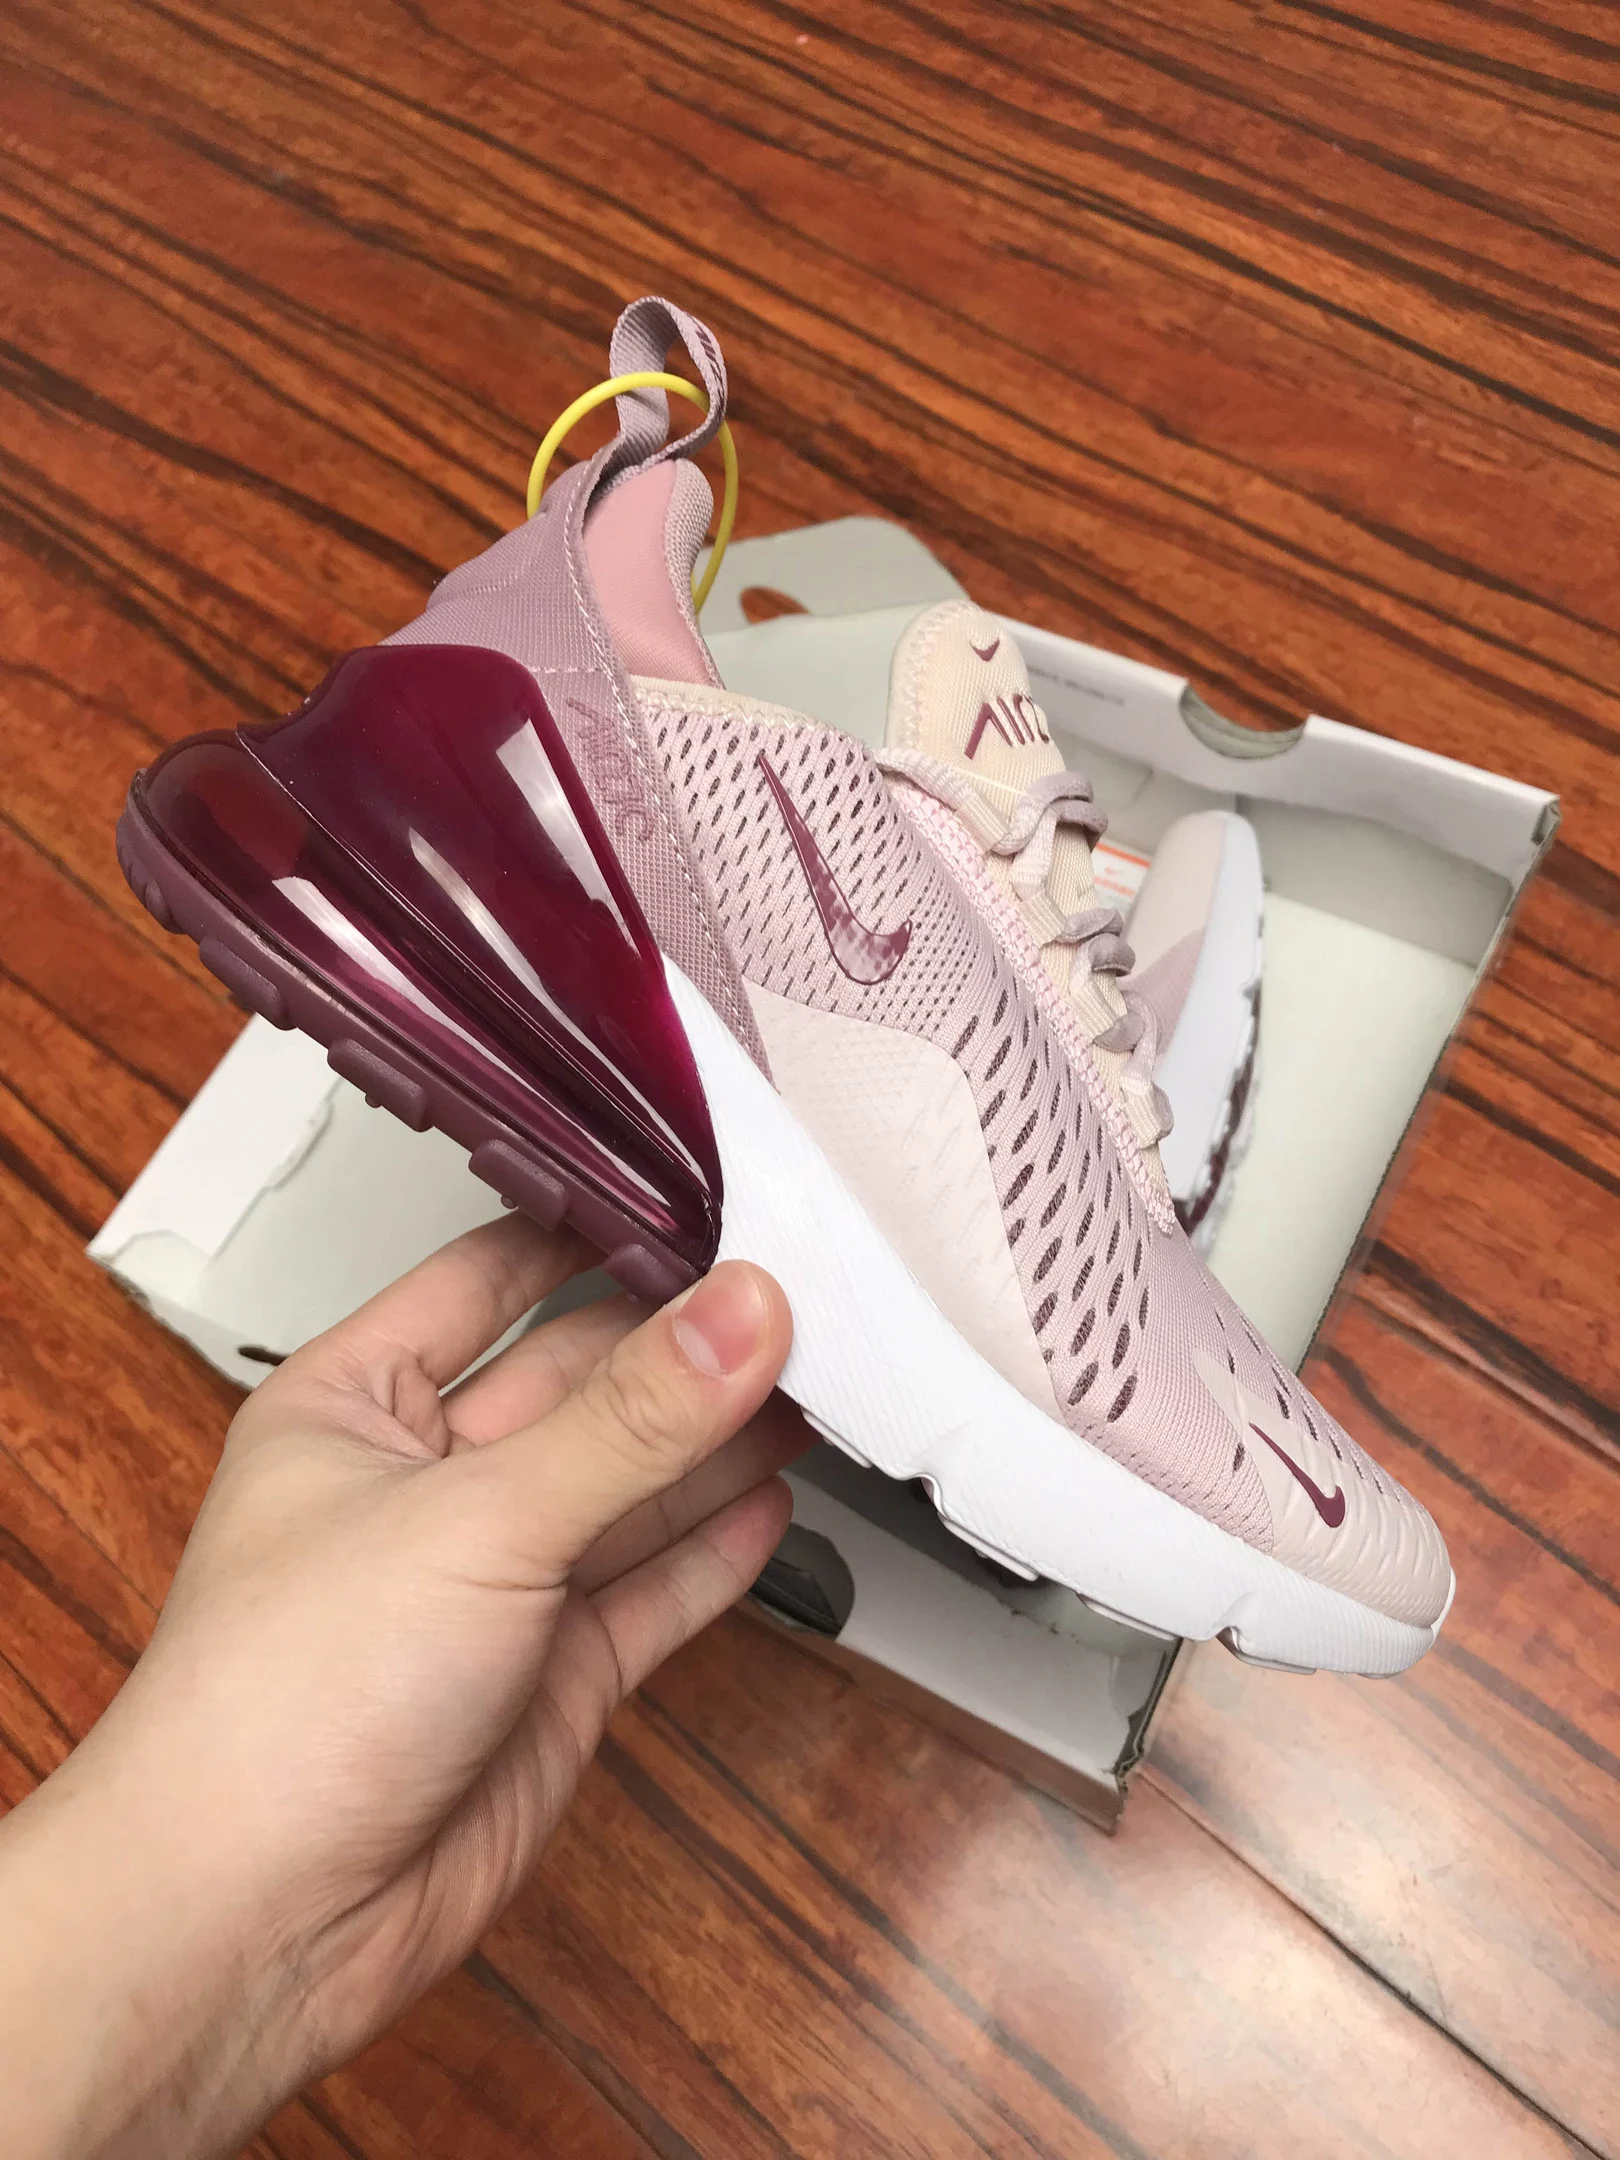 Nike Air Max 270 Barely Rose AH6789-601 For Sale